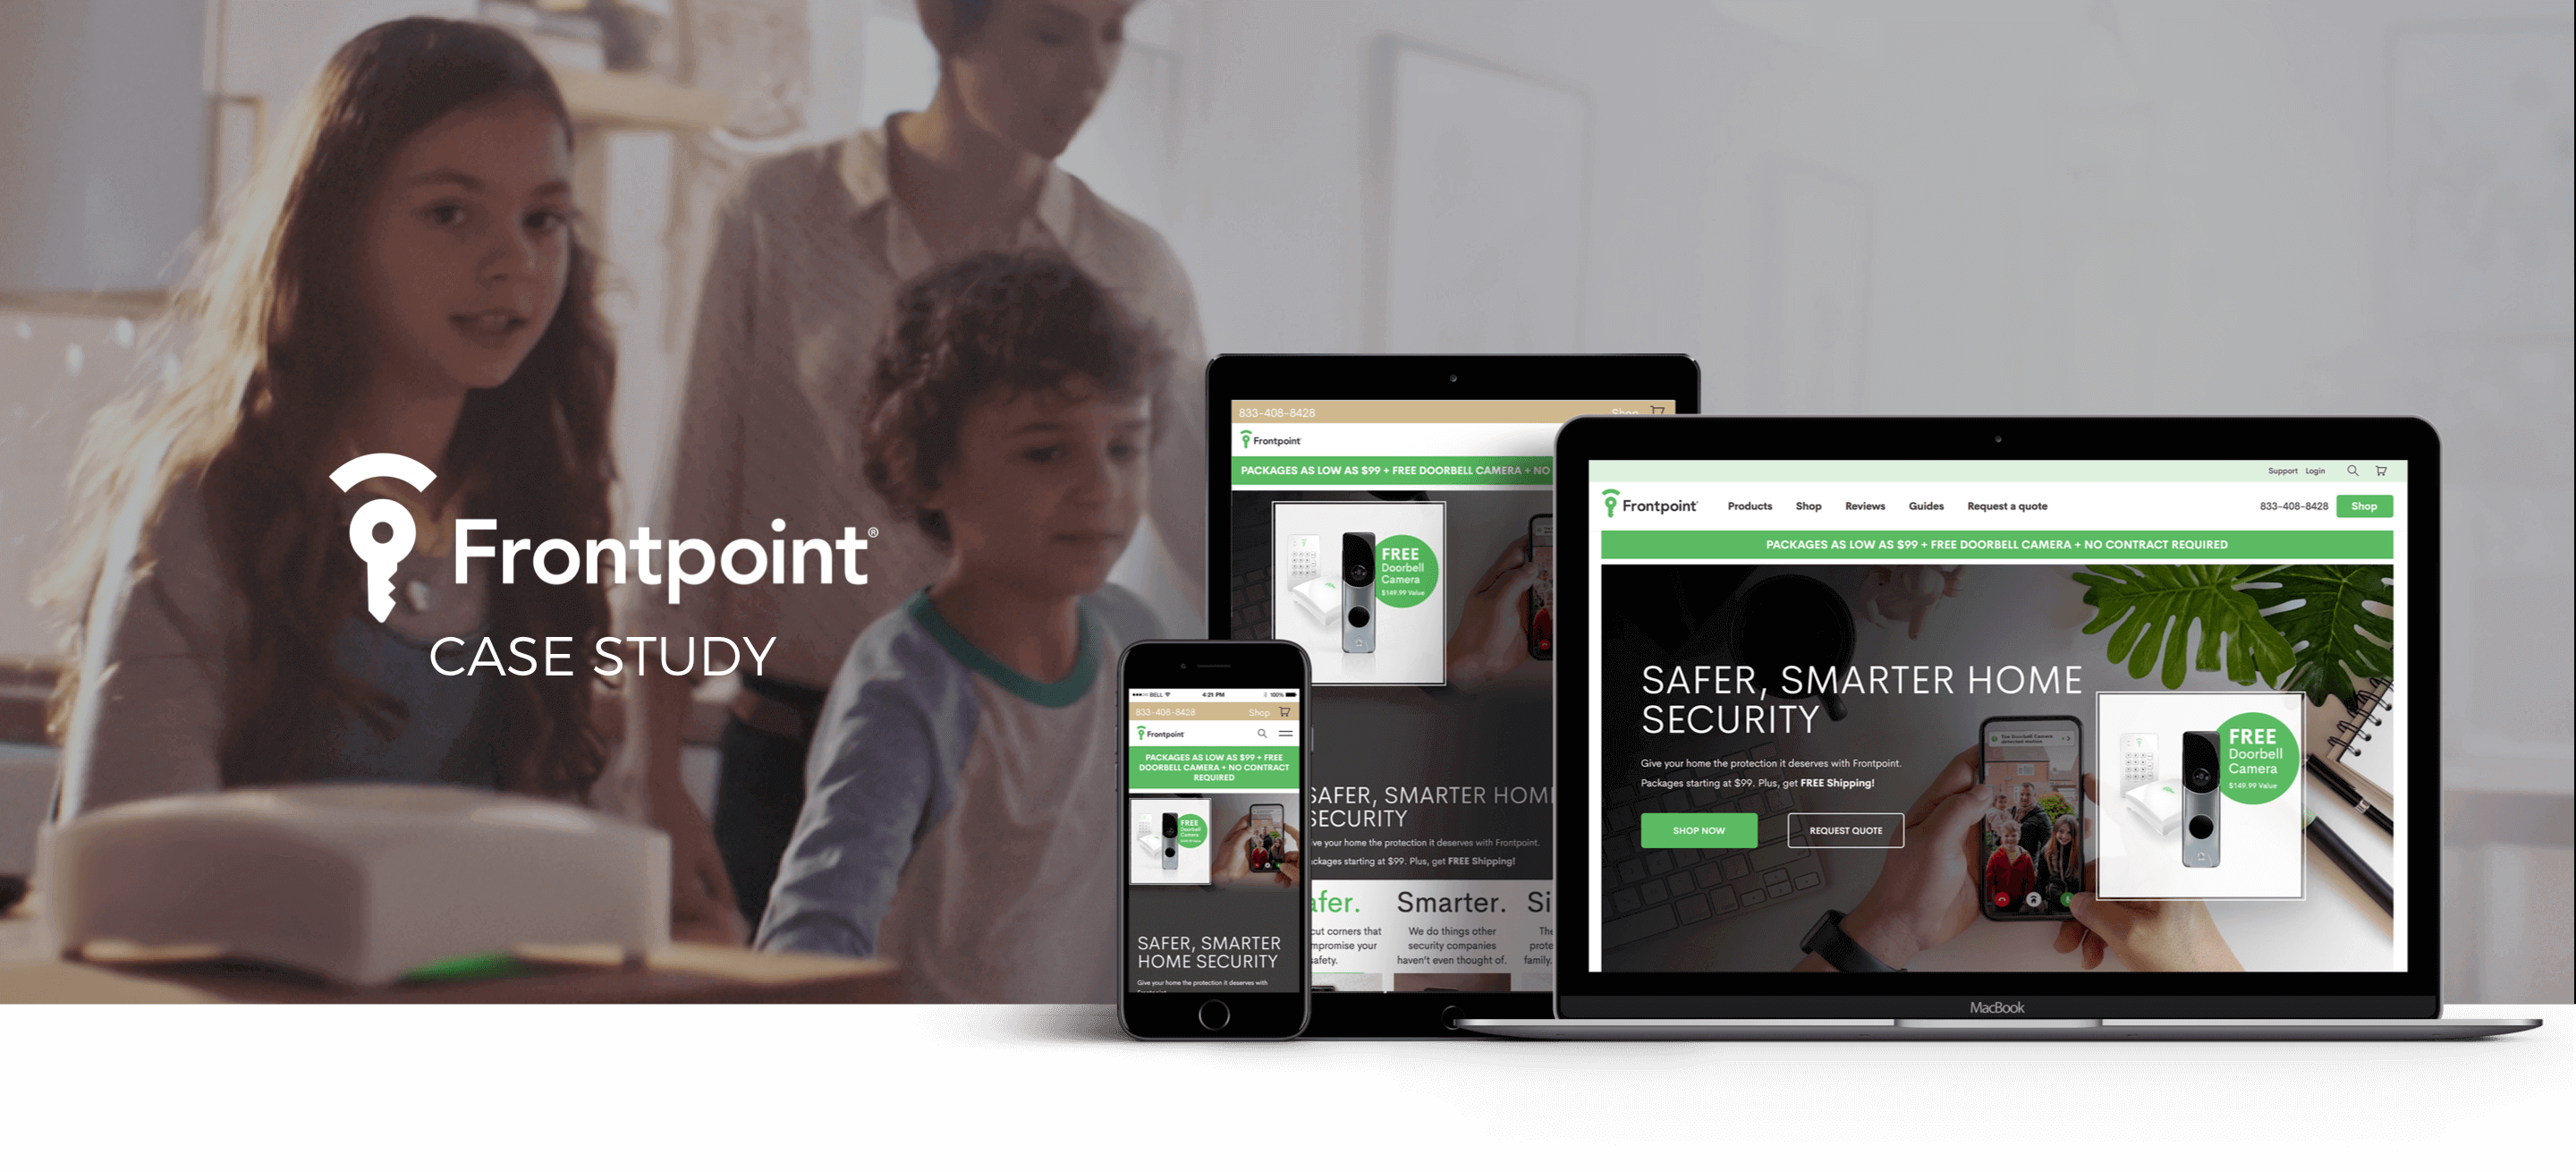 frontpoint security magento commerce 2 